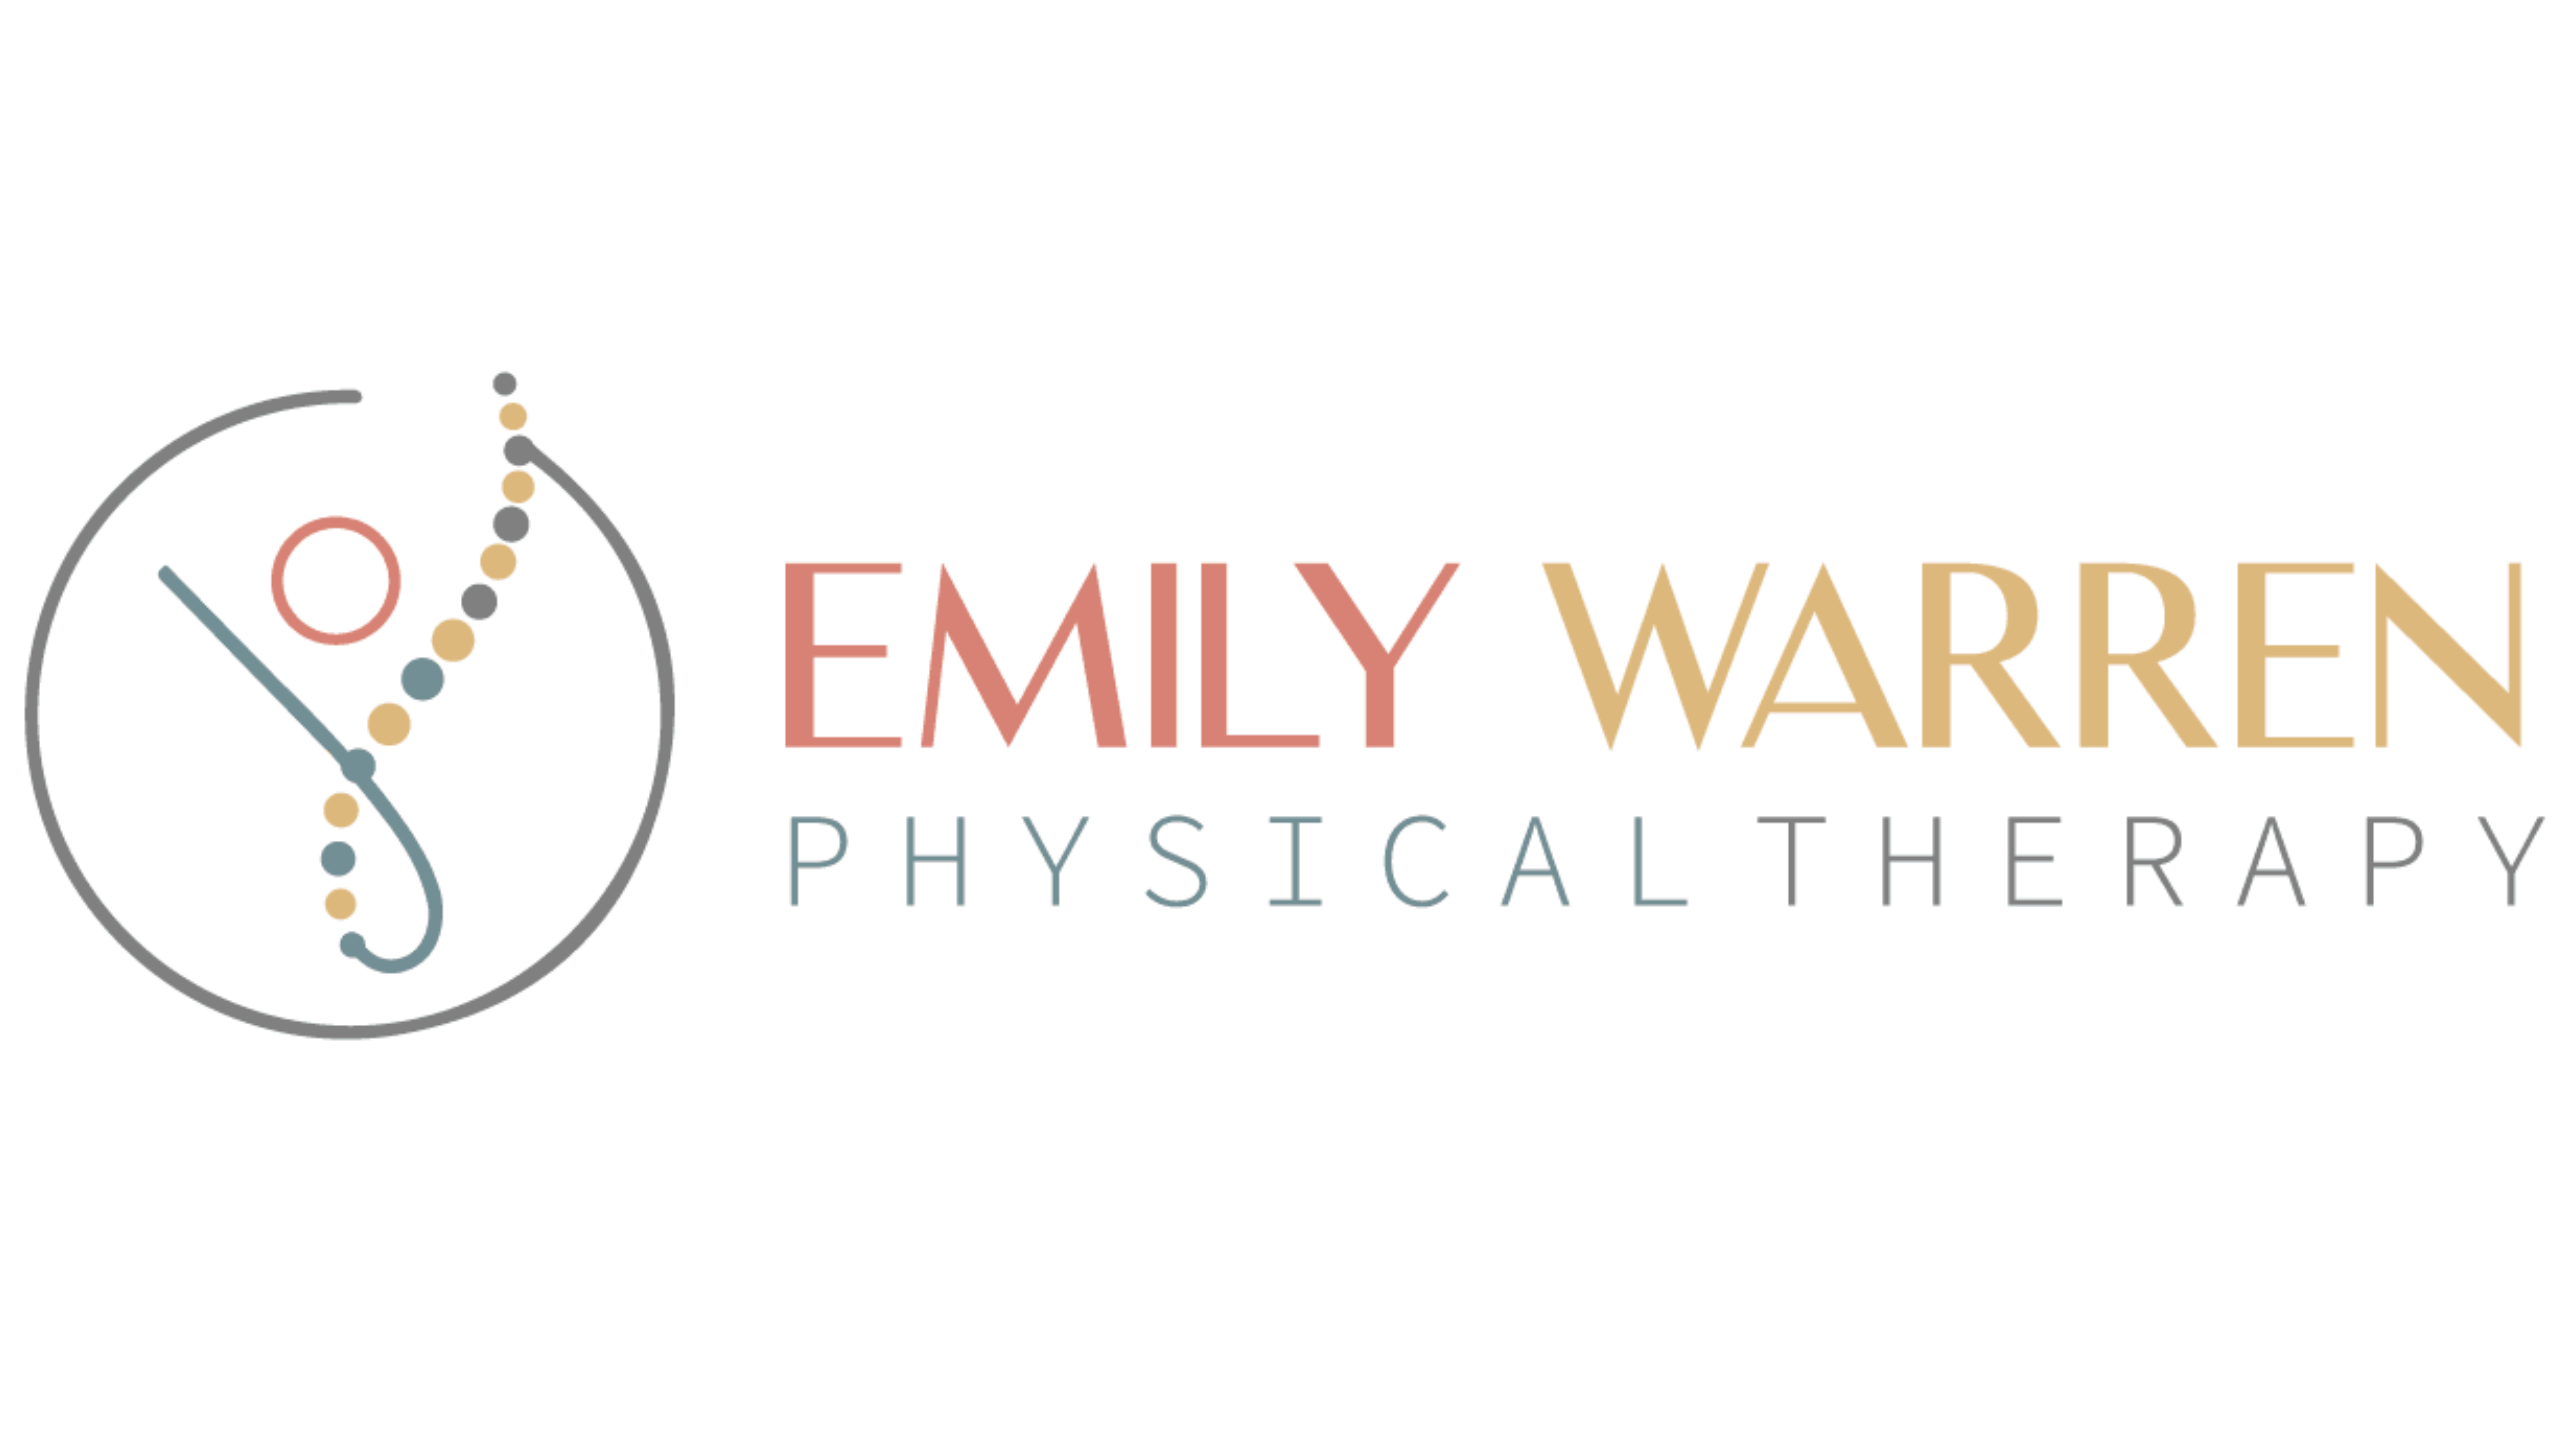 Emily Warren Physical Therapy